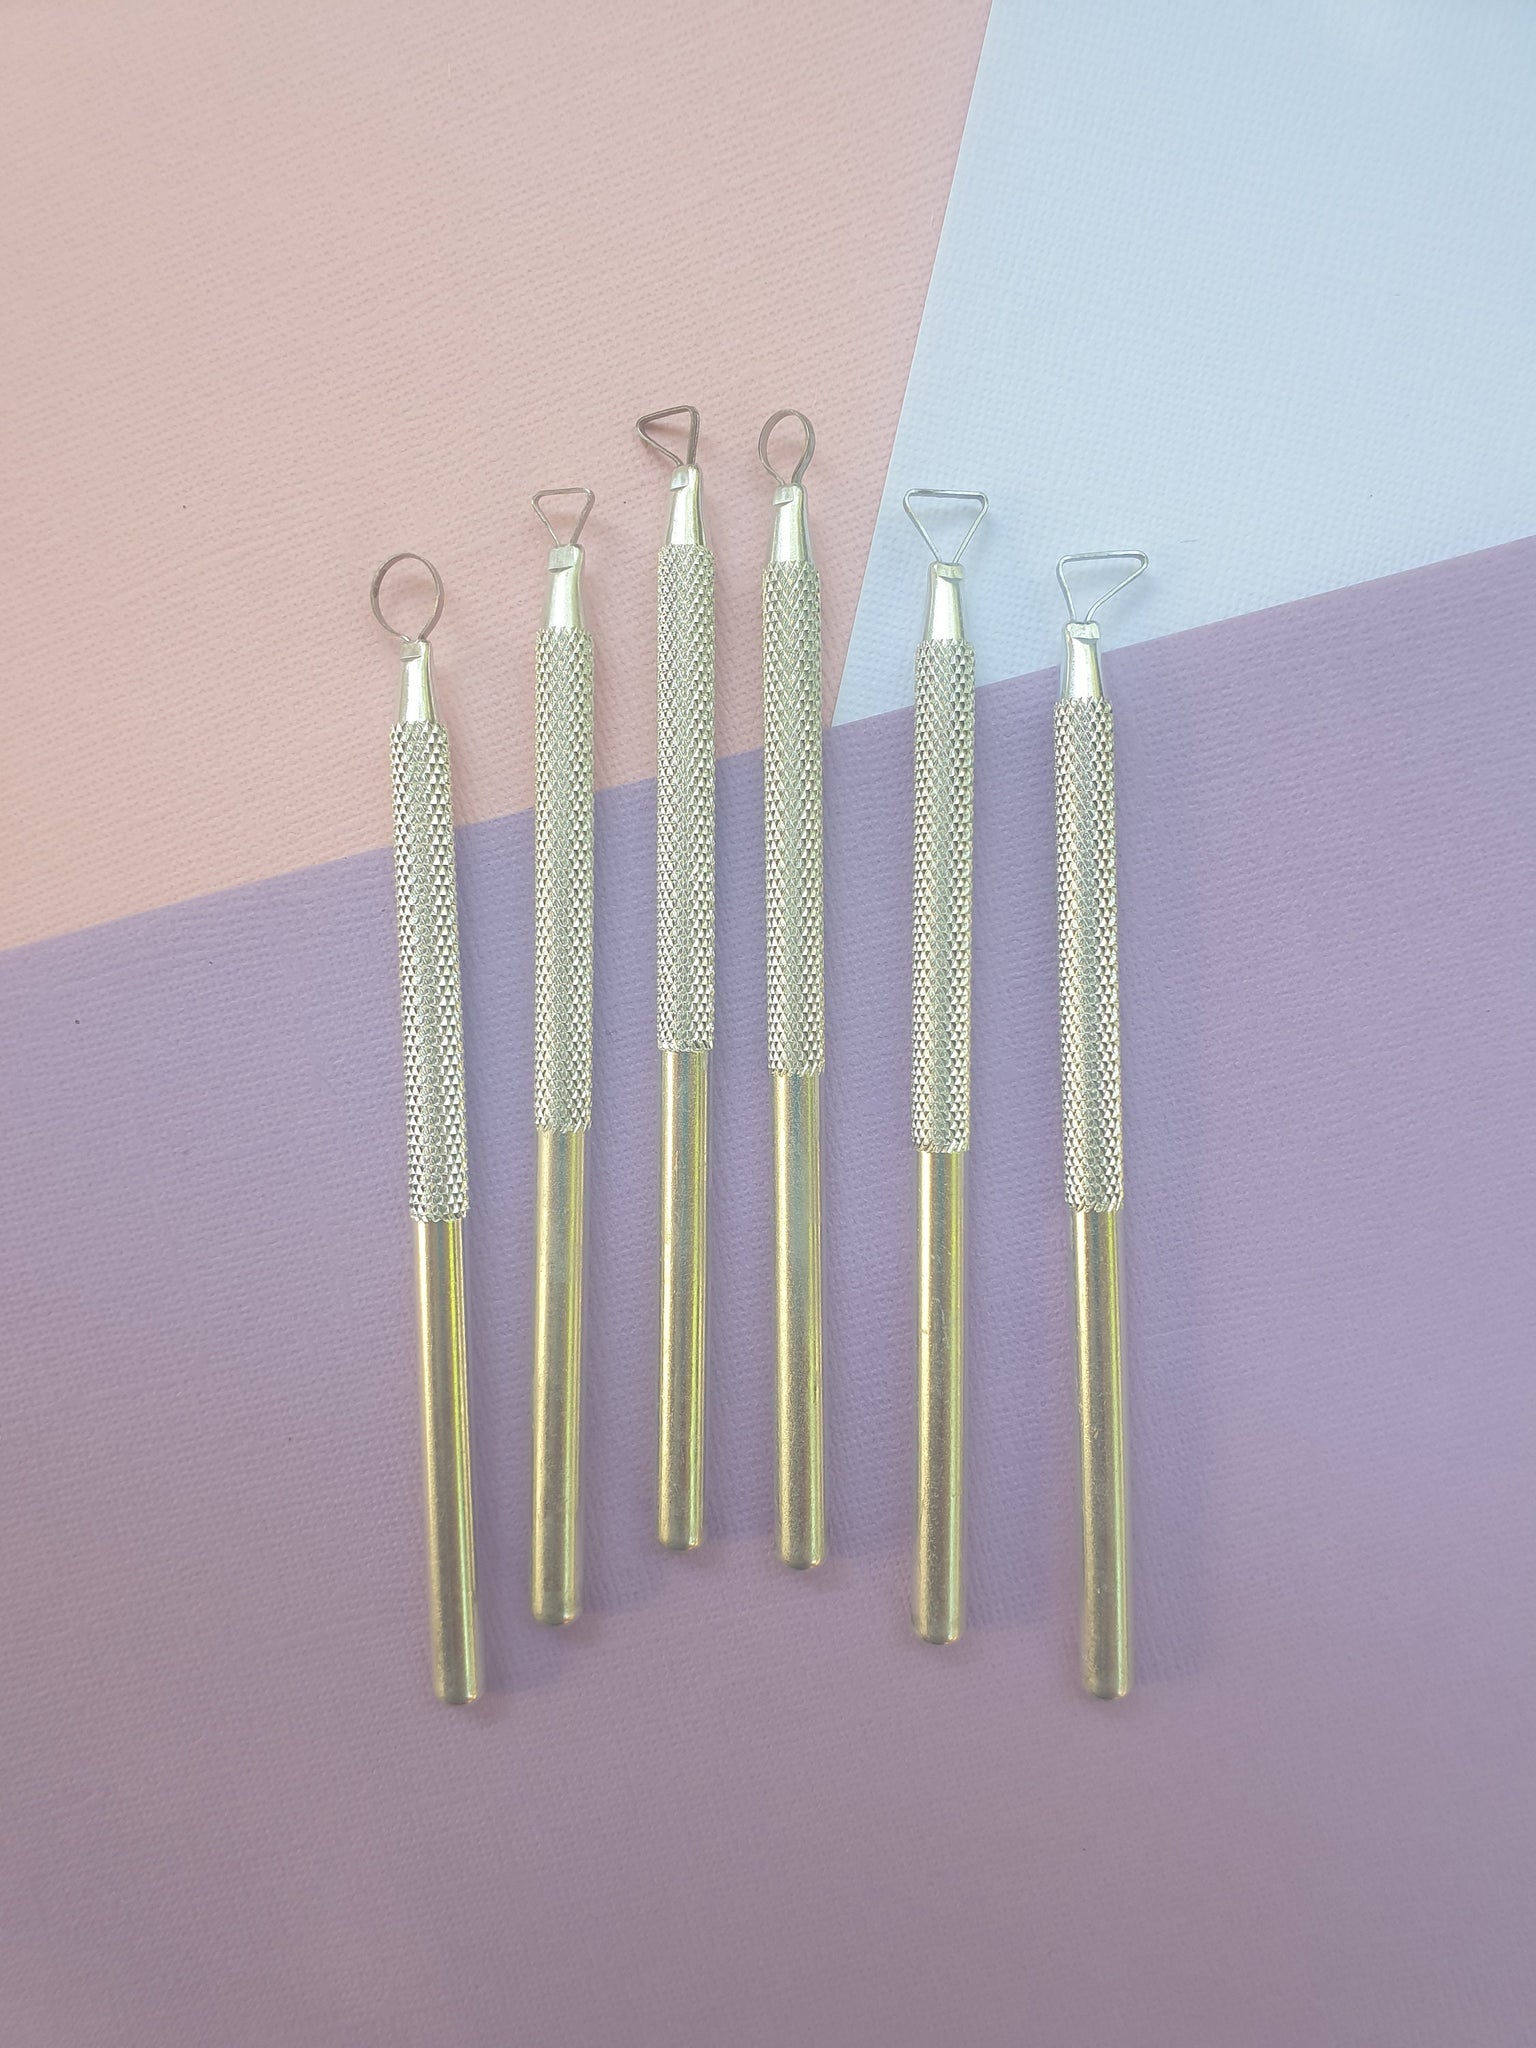 4Pcs Modeling Clay Carving Tools - Clay for Sculpting Stainless Steel  Needle Ceramic Supplies Pottery Clay Texture Art Tools - Sculpting Tools  Modeling Clay Tool Kit Polymer Clay Needle Tool Set